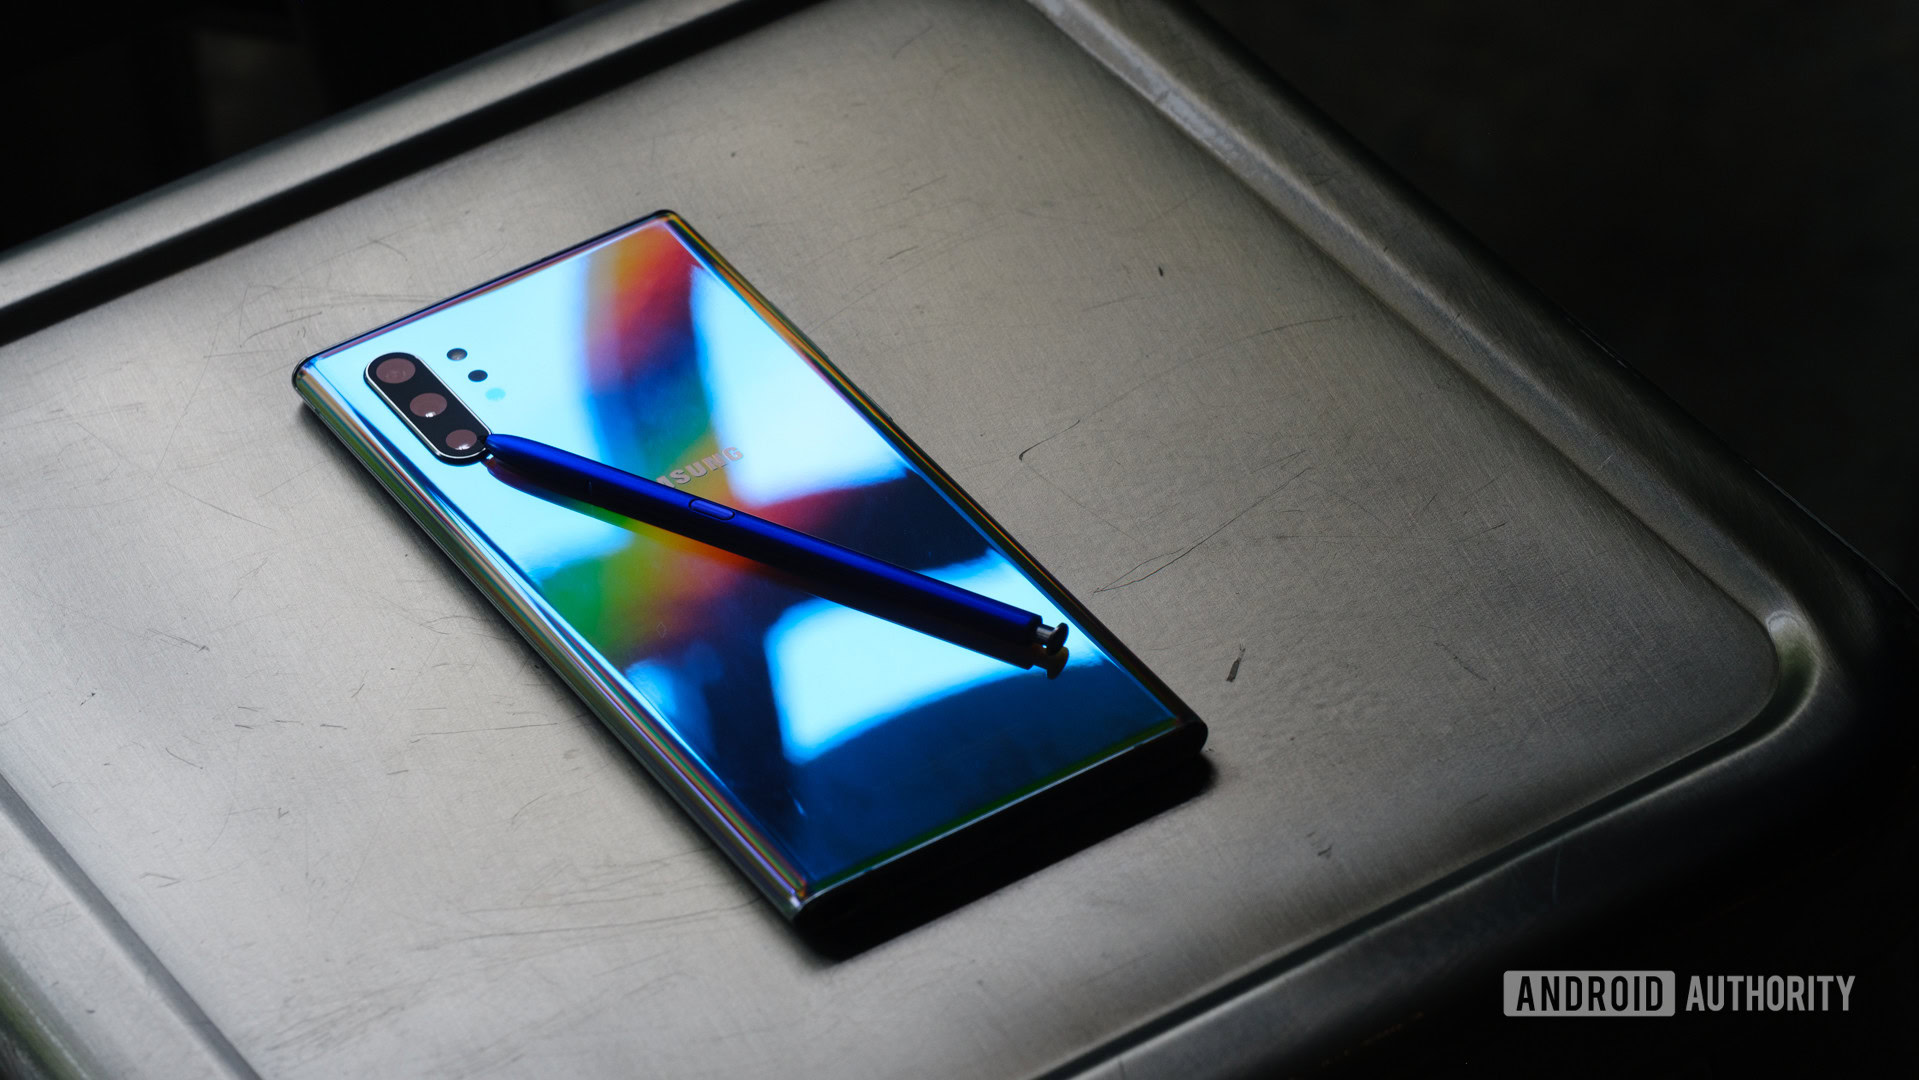 Samsung Galaxy Note 10 Plus review: Bigger, better, more expensive